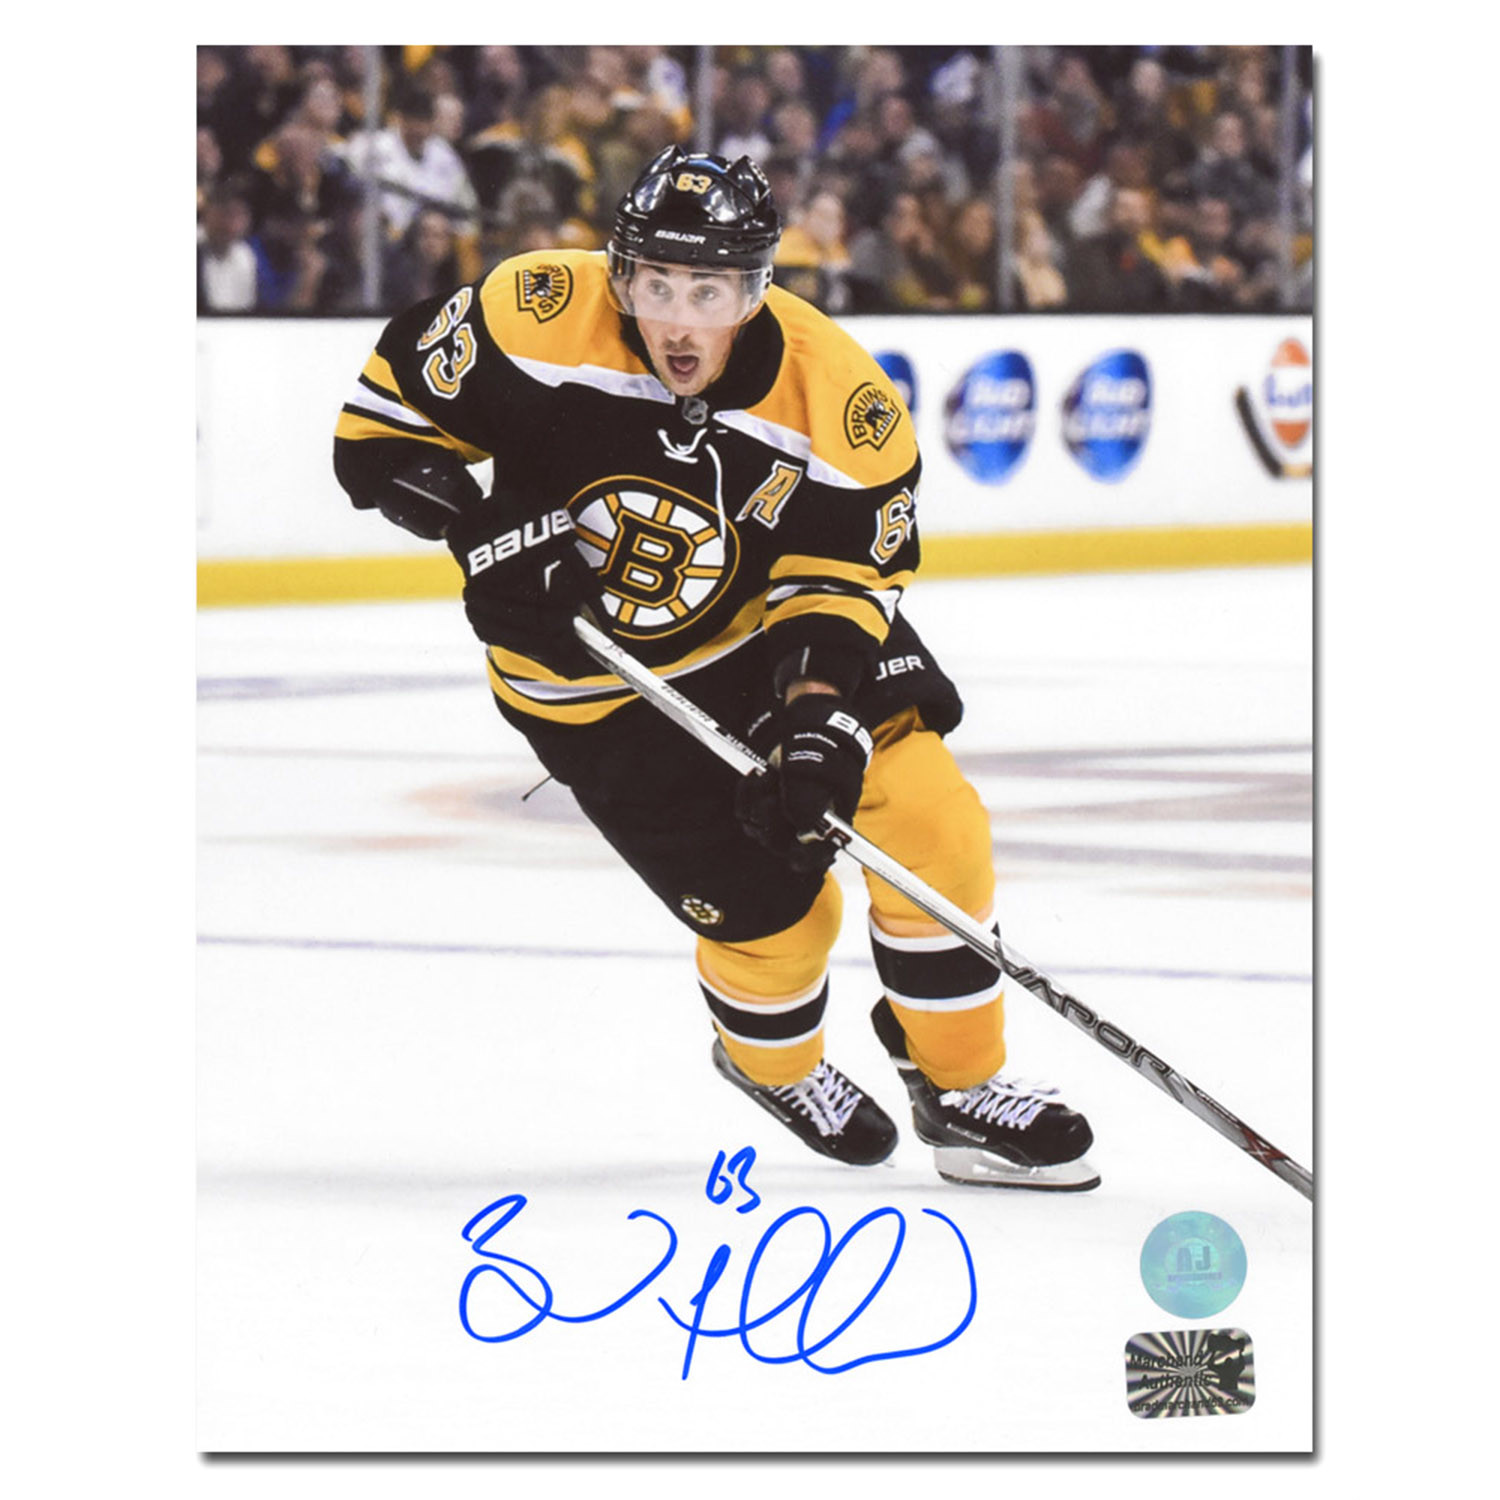 brad marchand signed jersey